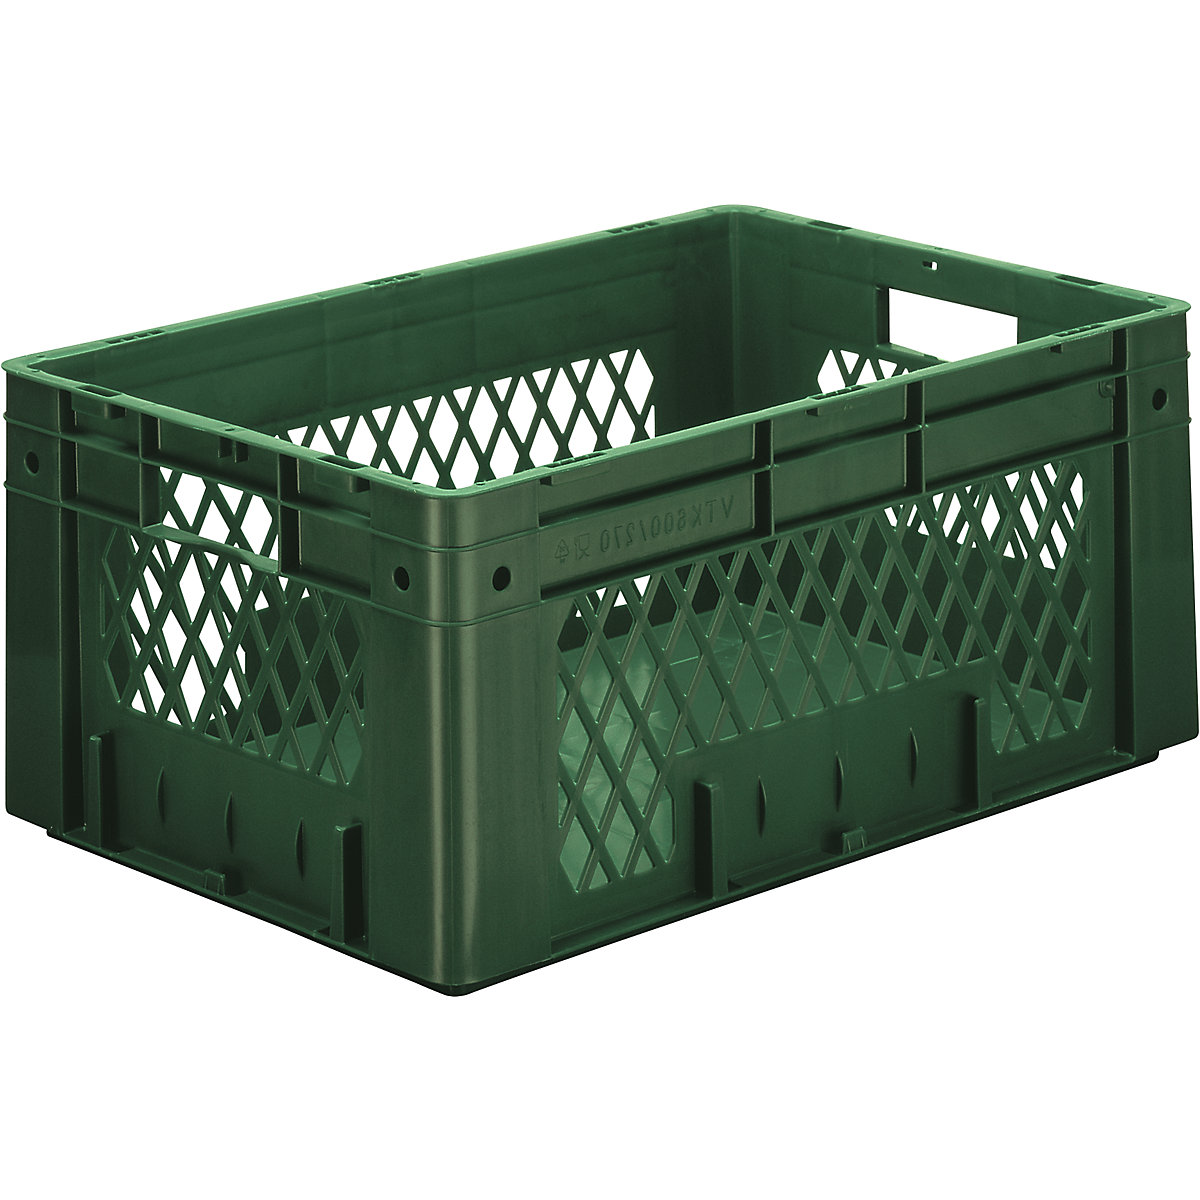 Heavy duty Euro container, polypropylene, capacity 50 l, LxWxH 600 x 400 x 270 mm, perforated walls, solid base, green, pack of 2-3